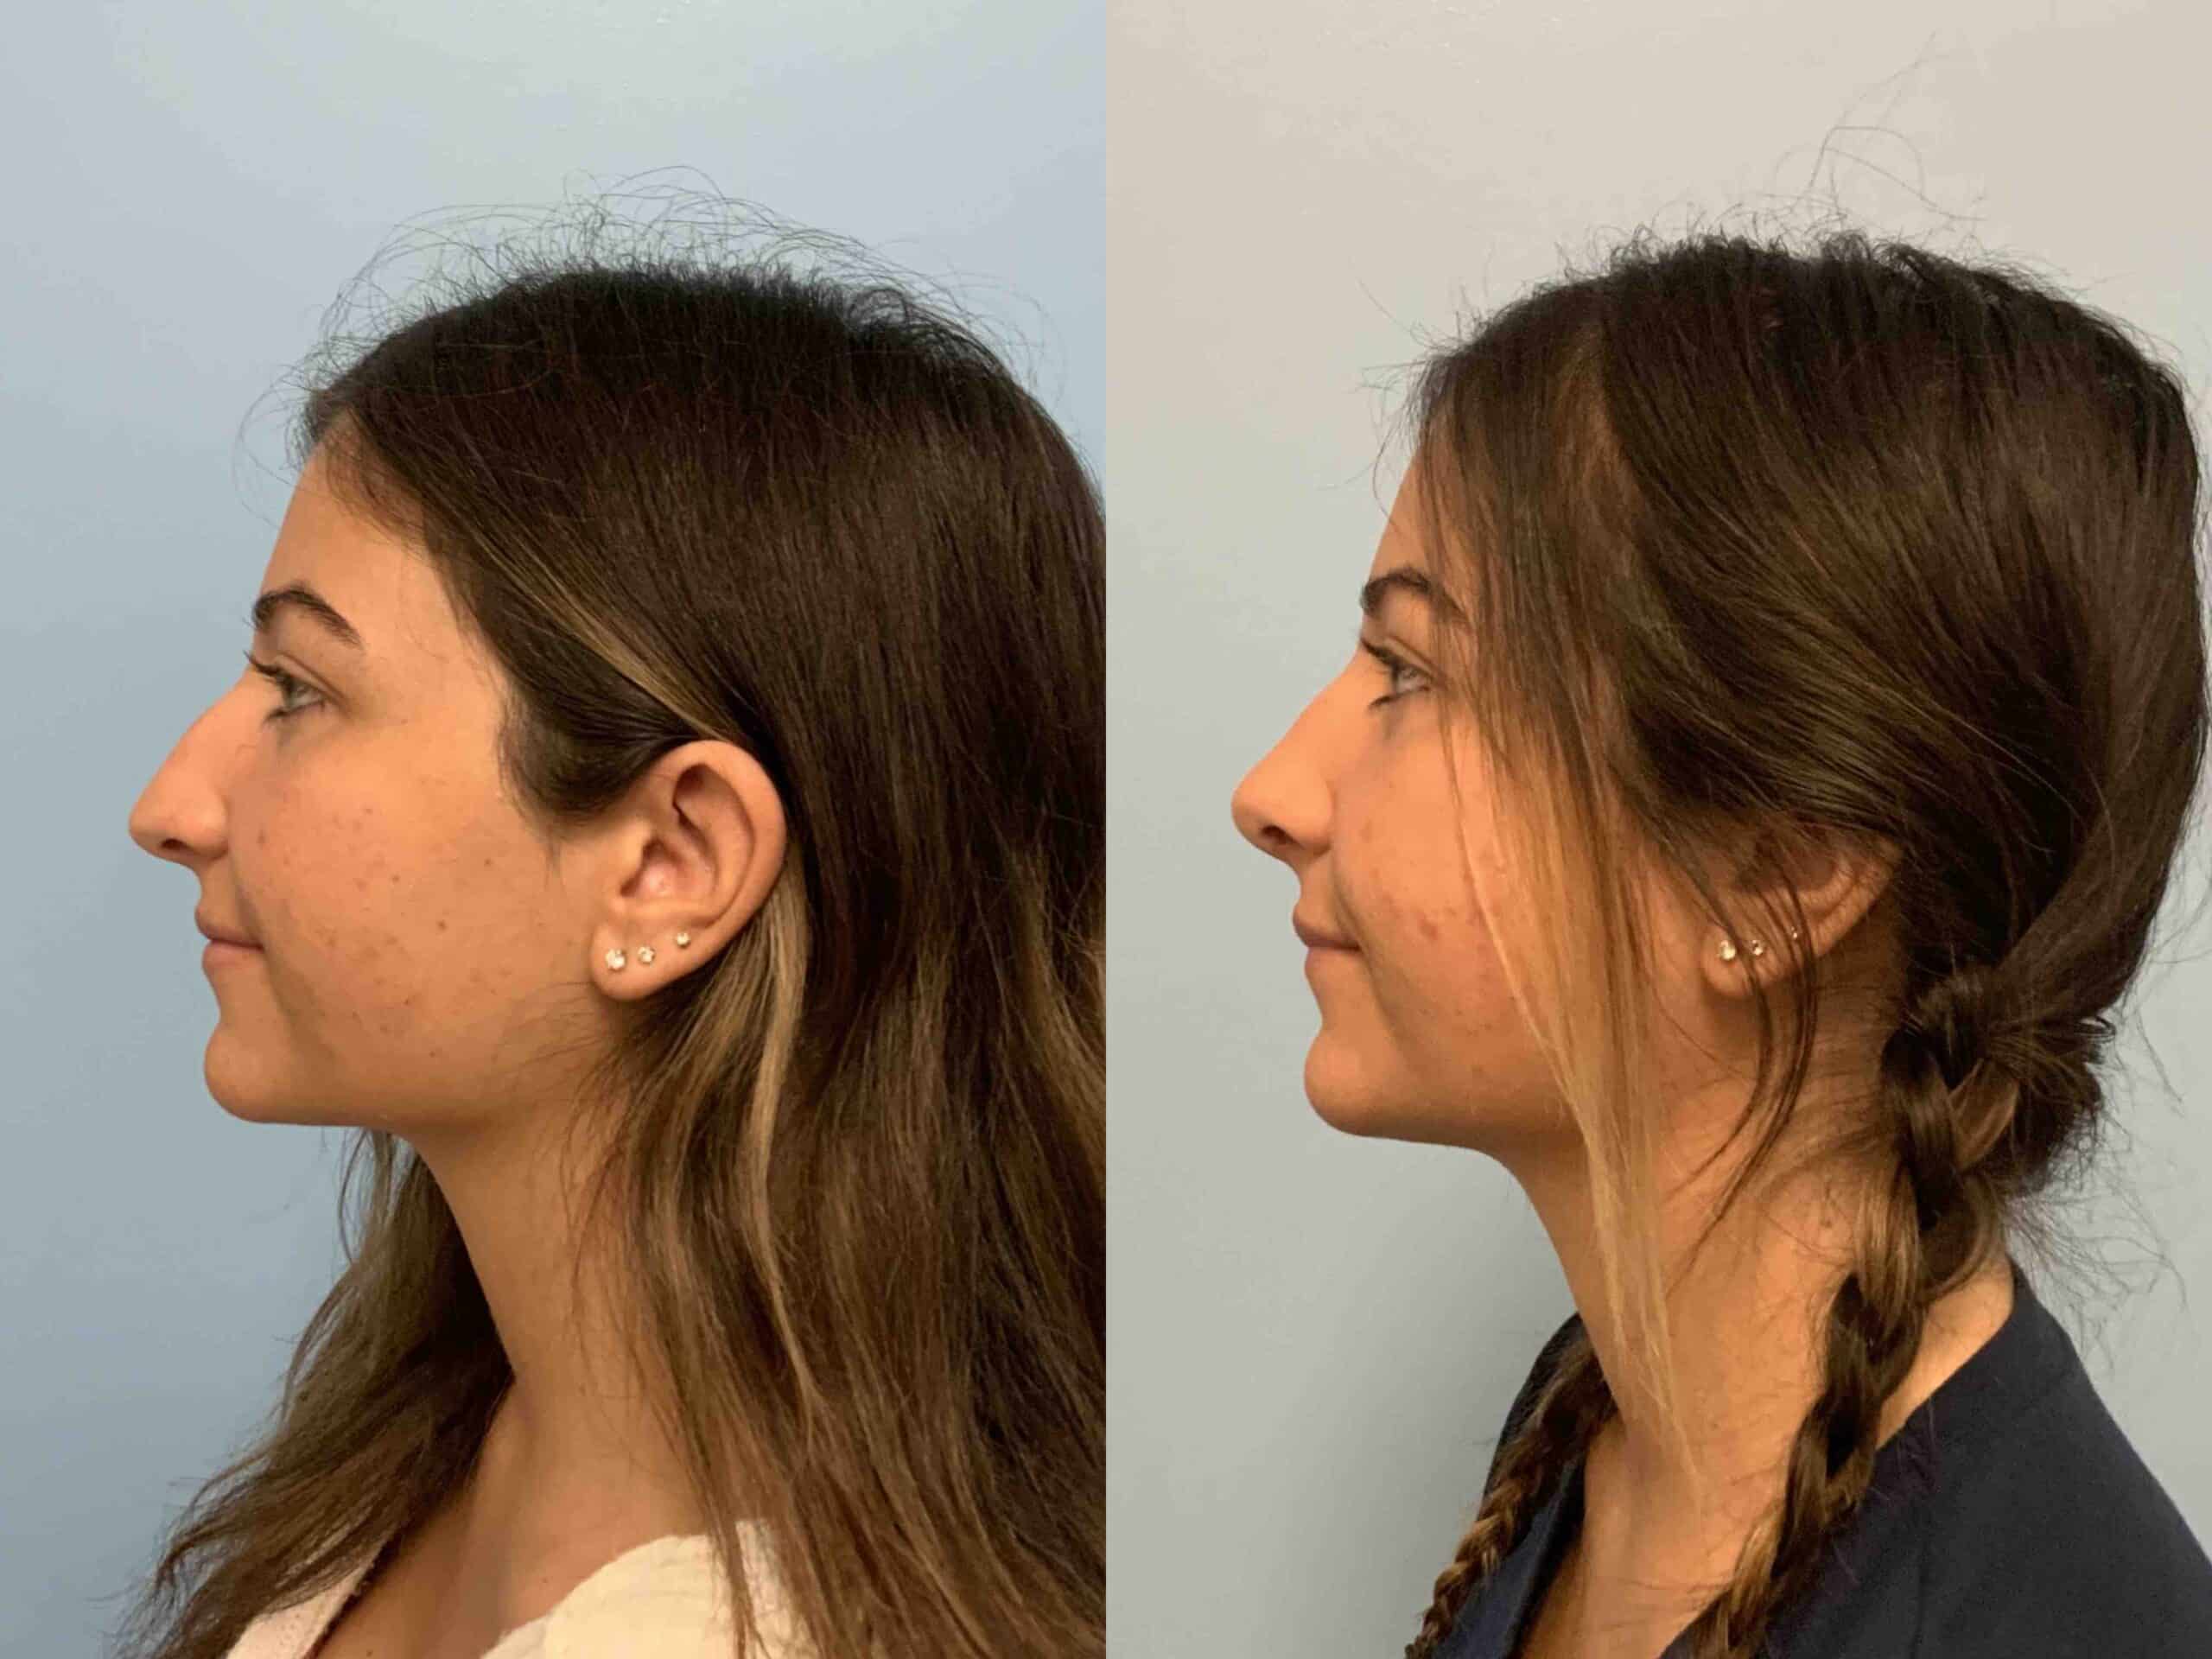 Before and after, 1 mo post op from Rhinoplasty performed by Dr. Paul Vanek